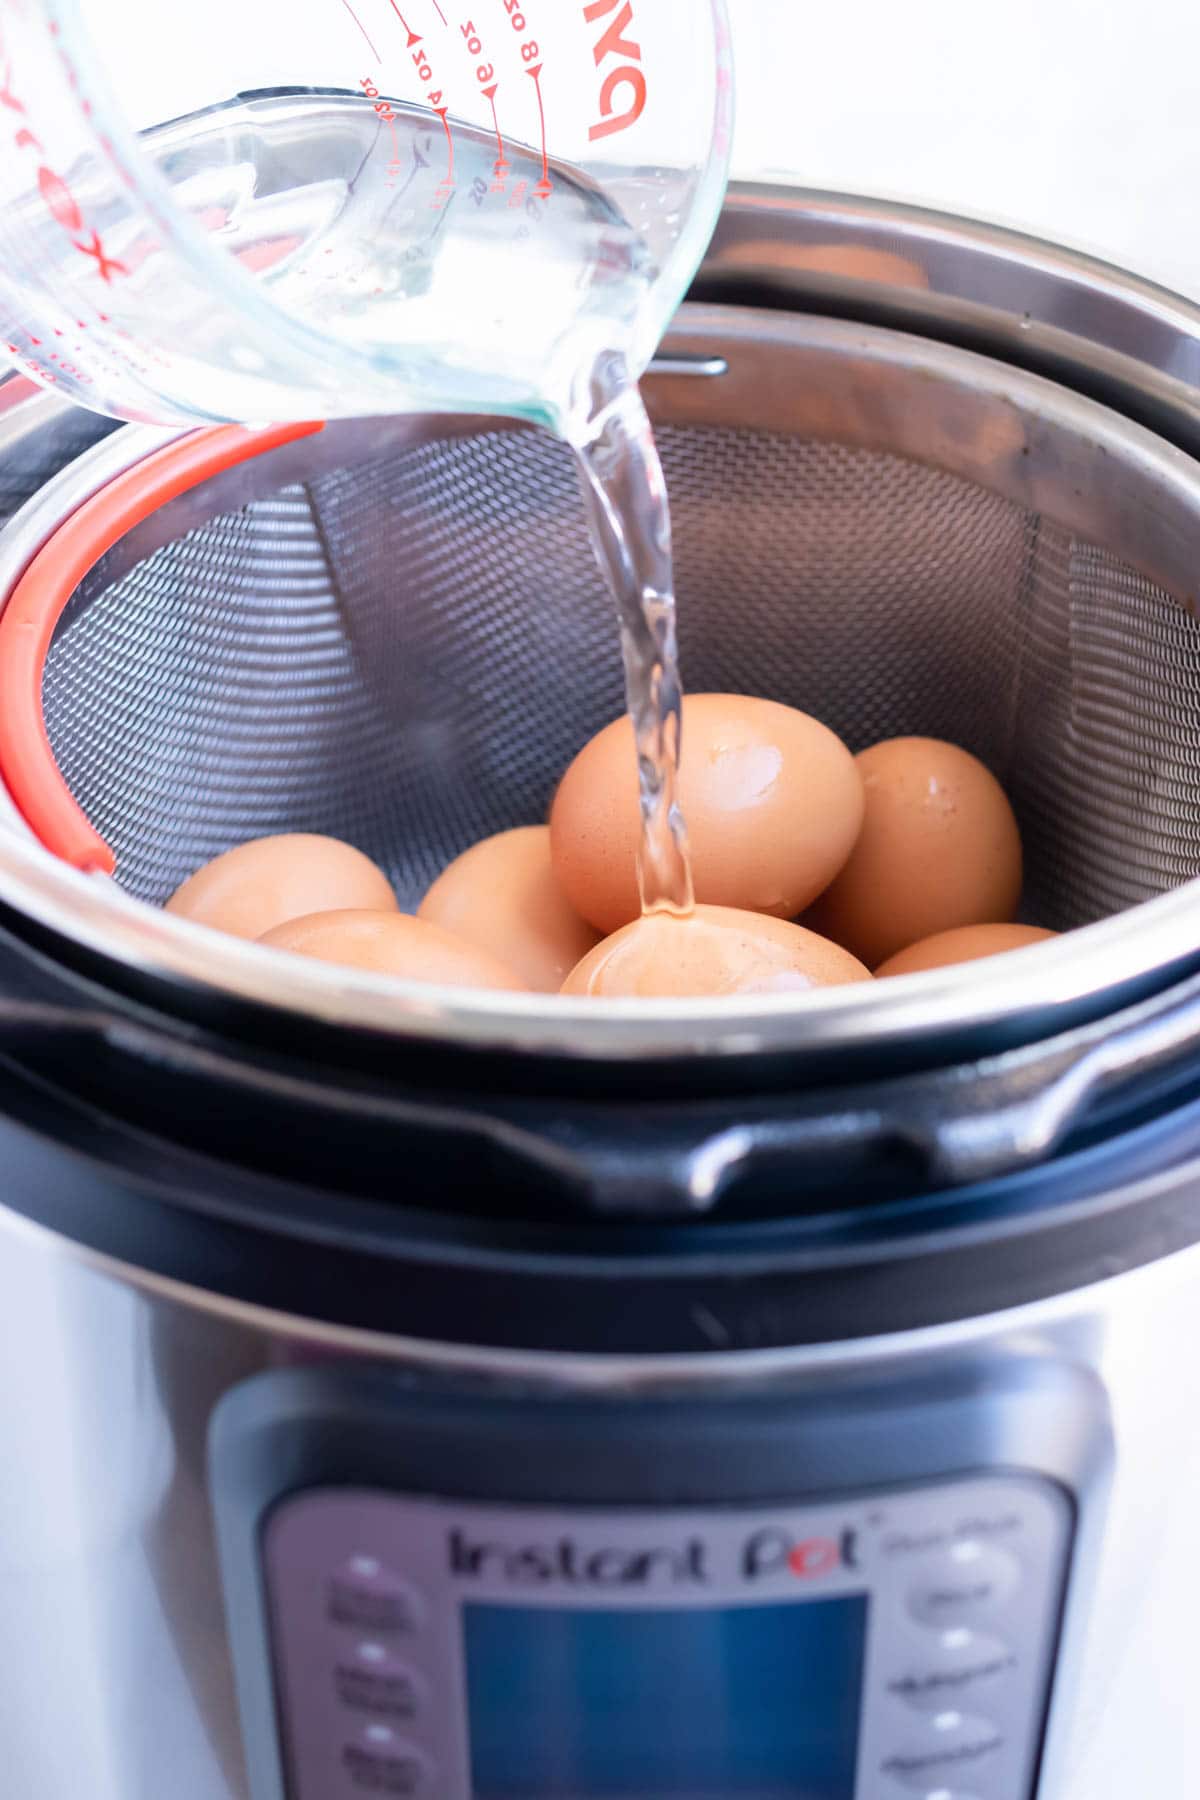 Cold water being poured over eggs into an instant pot.